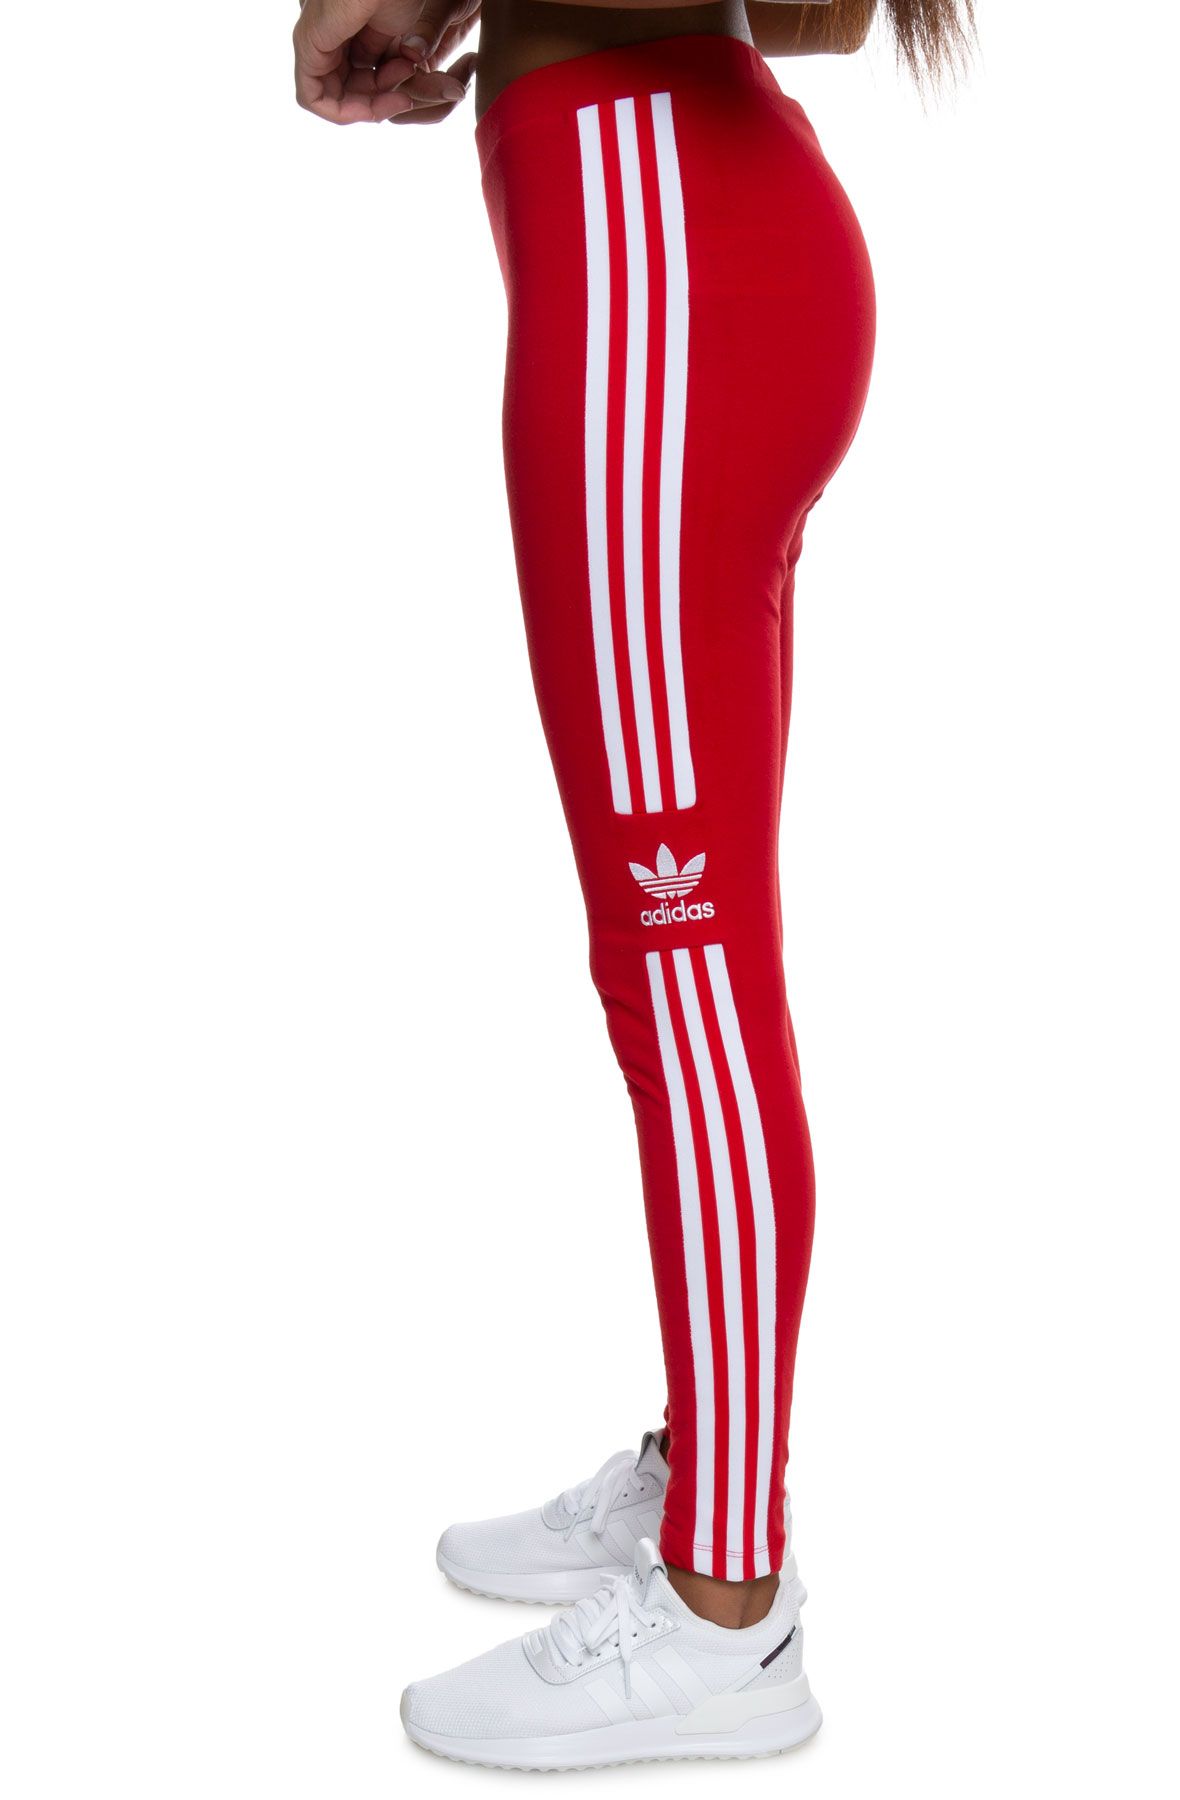 Adidas Trefoil Women's Tights Red